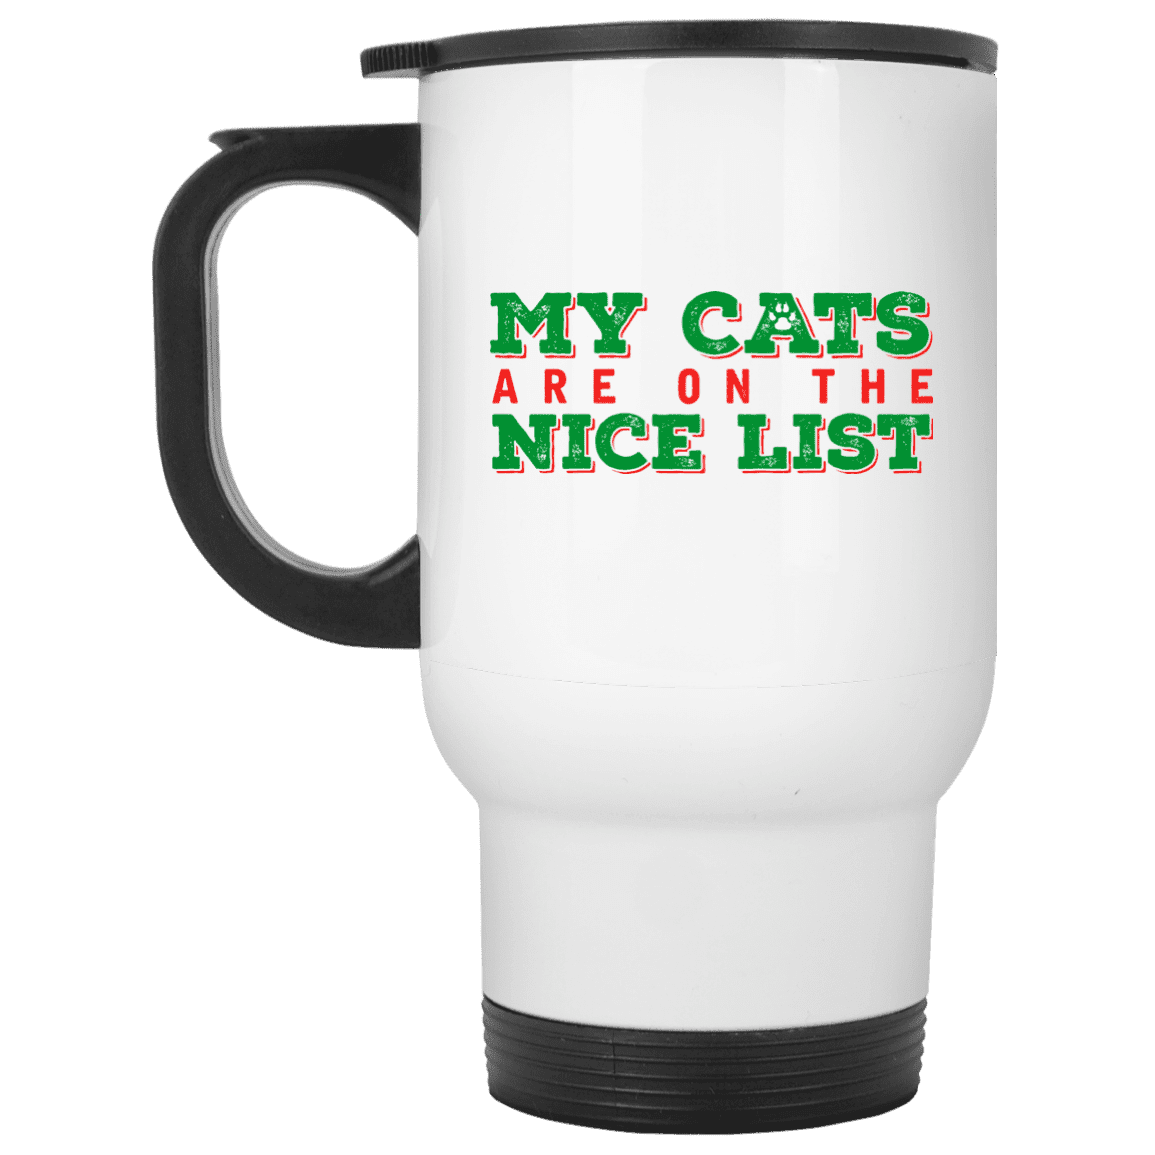 My Cats Are On The Nice List - Mugs.